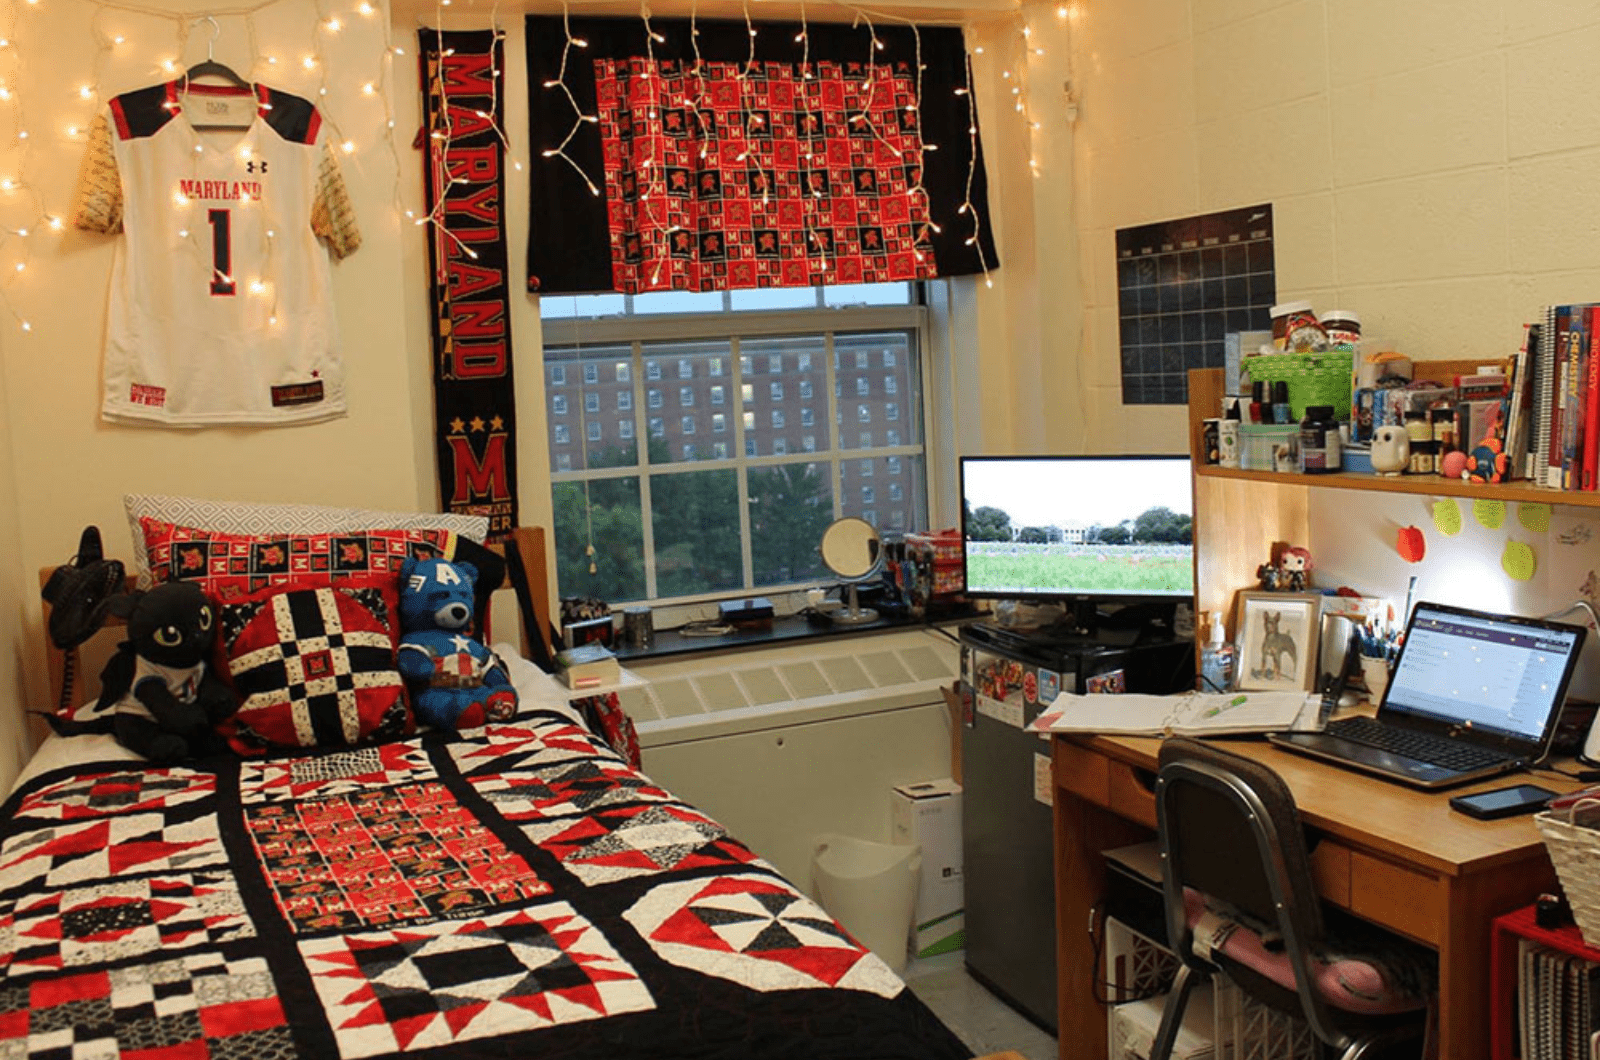 single room with a bed, desk and red decorations